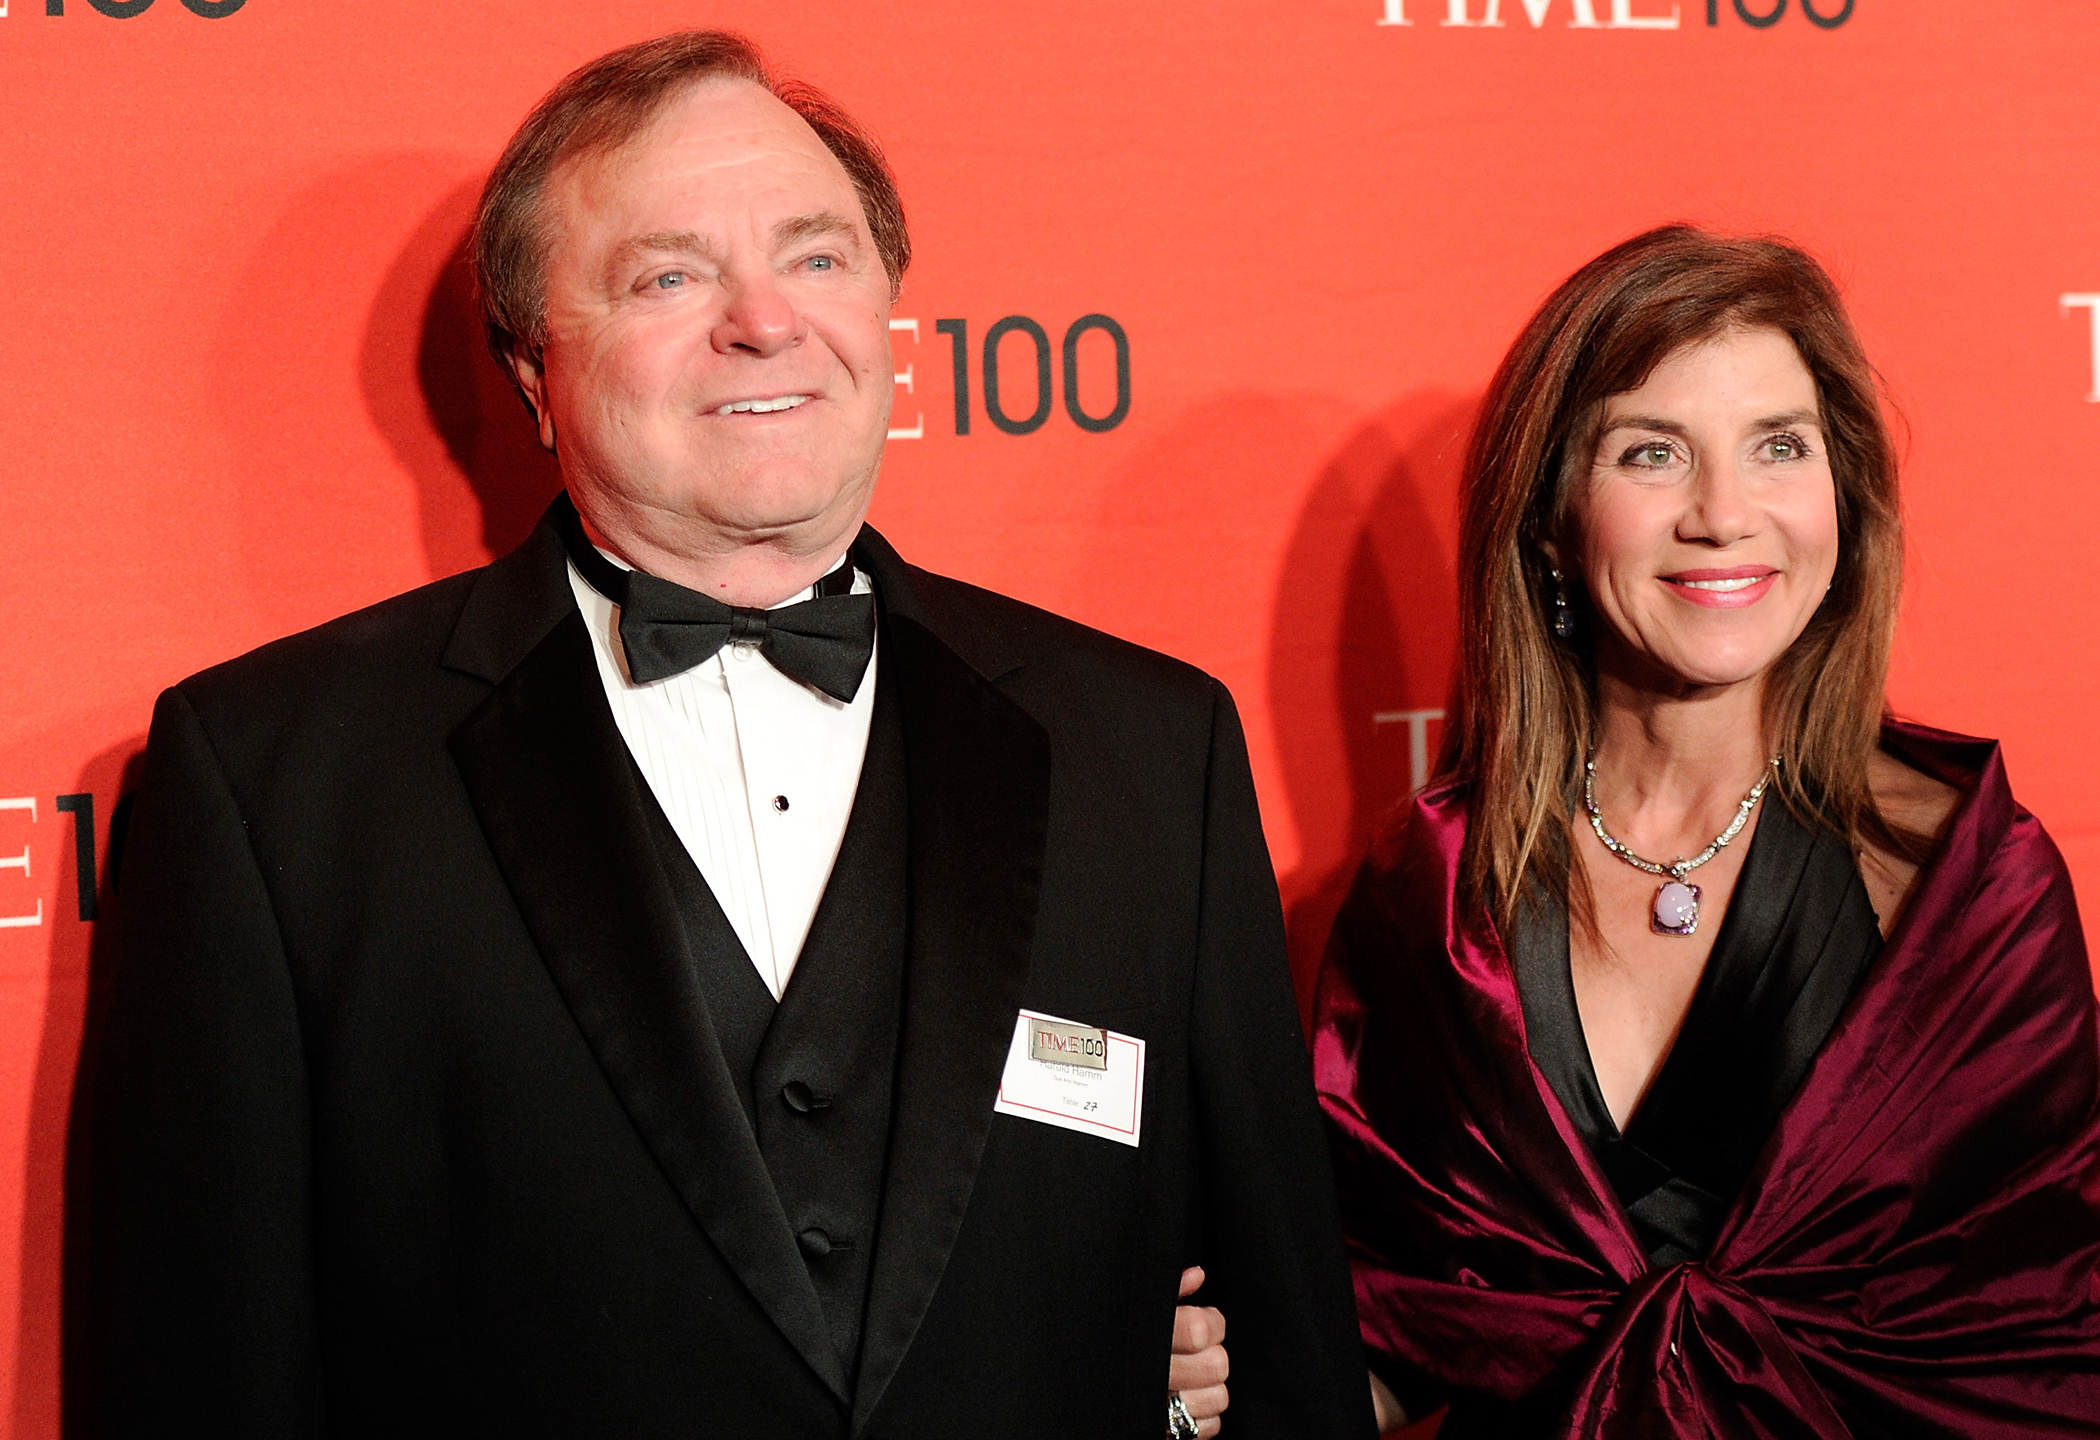 CEO Harold Hamm and his then wife Sue Ann Hamm